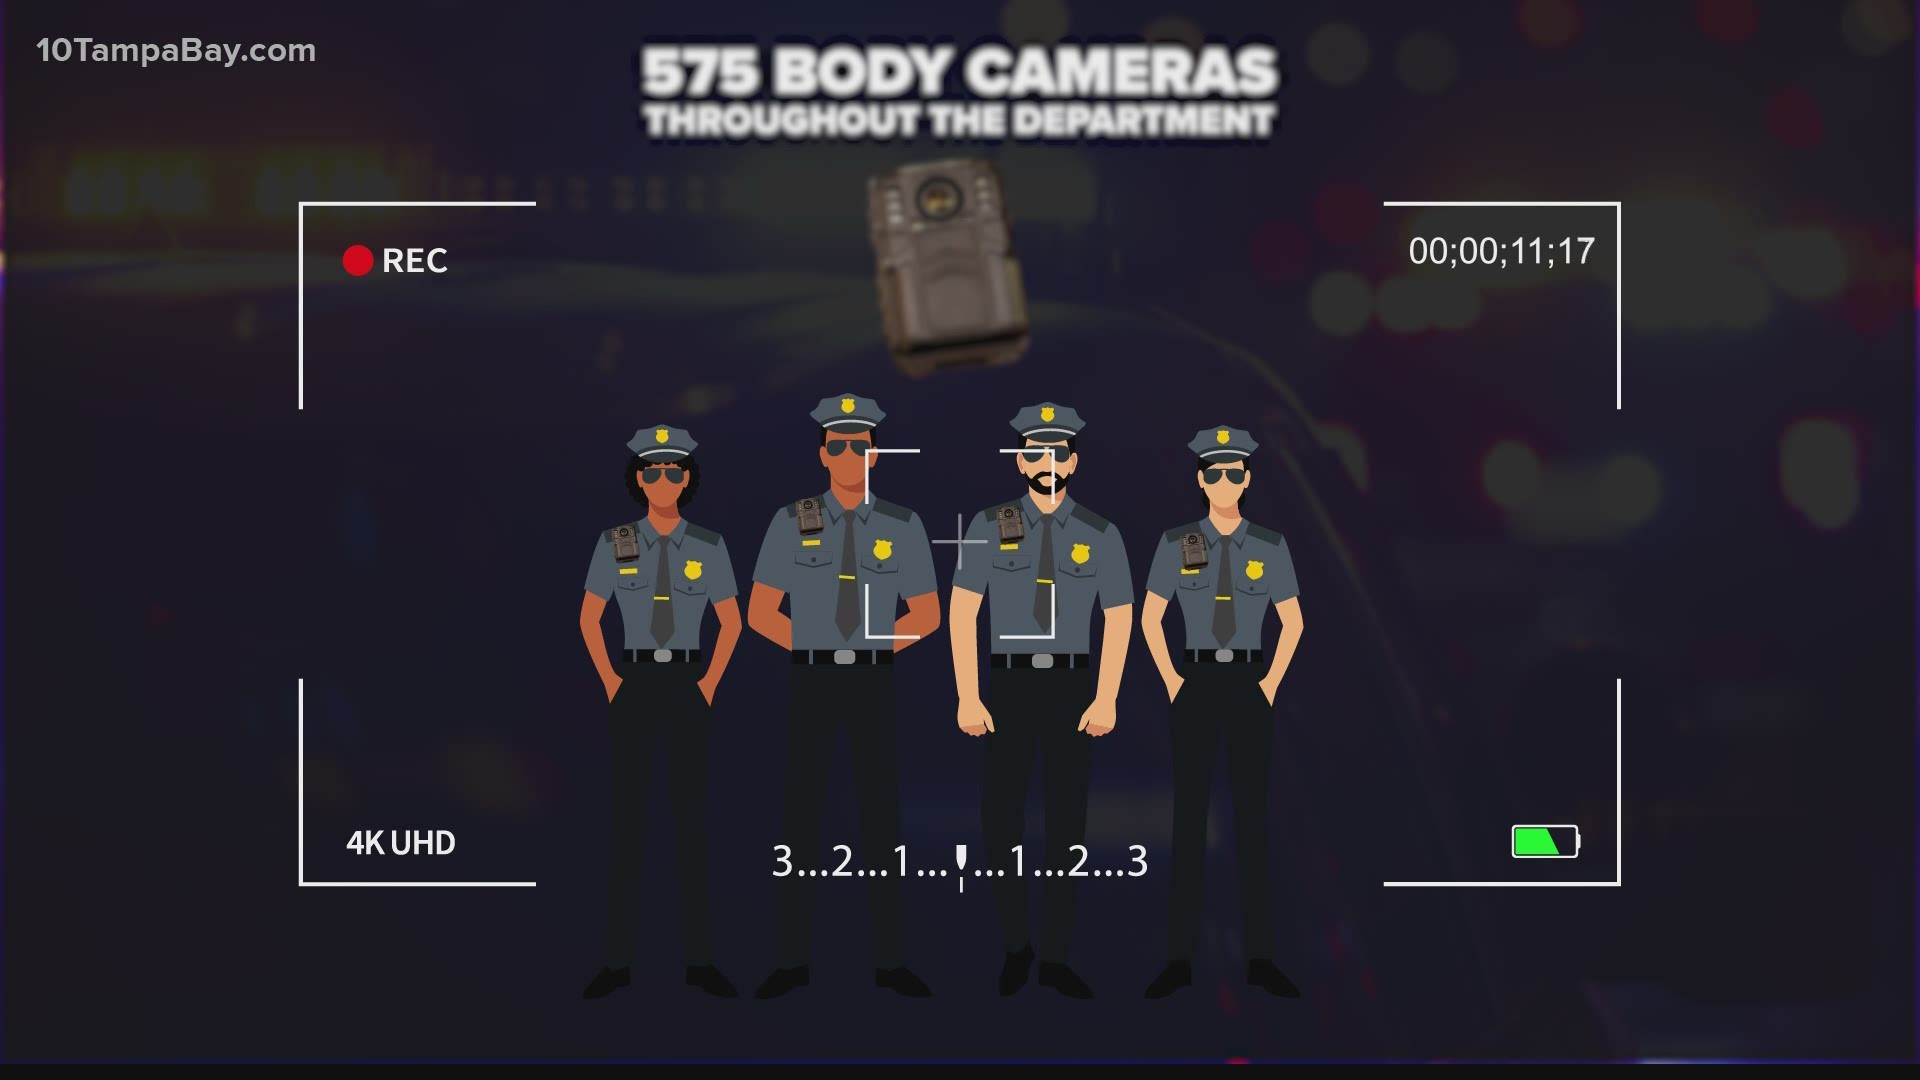 After years of consideration, the St. Petersburg Police Department launched a new body camera program that will eventually outfit all 575 officers with the devices.